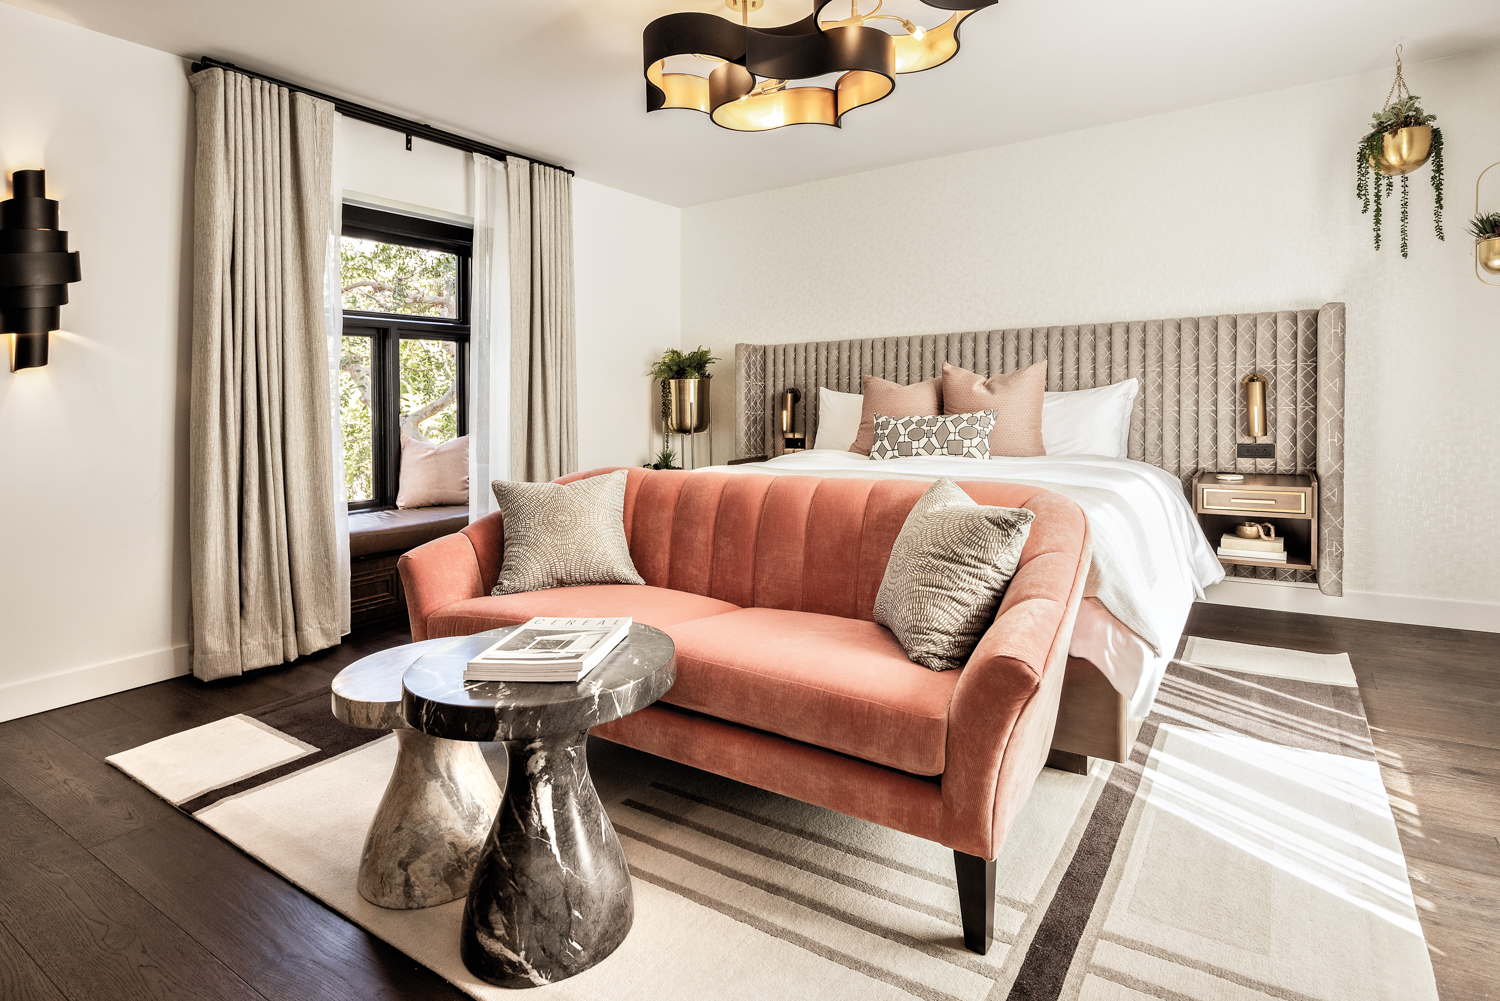 Bedroom at Orli La Jolla with a peach-colored tufted loveseat and a pair of marble coffee tables 